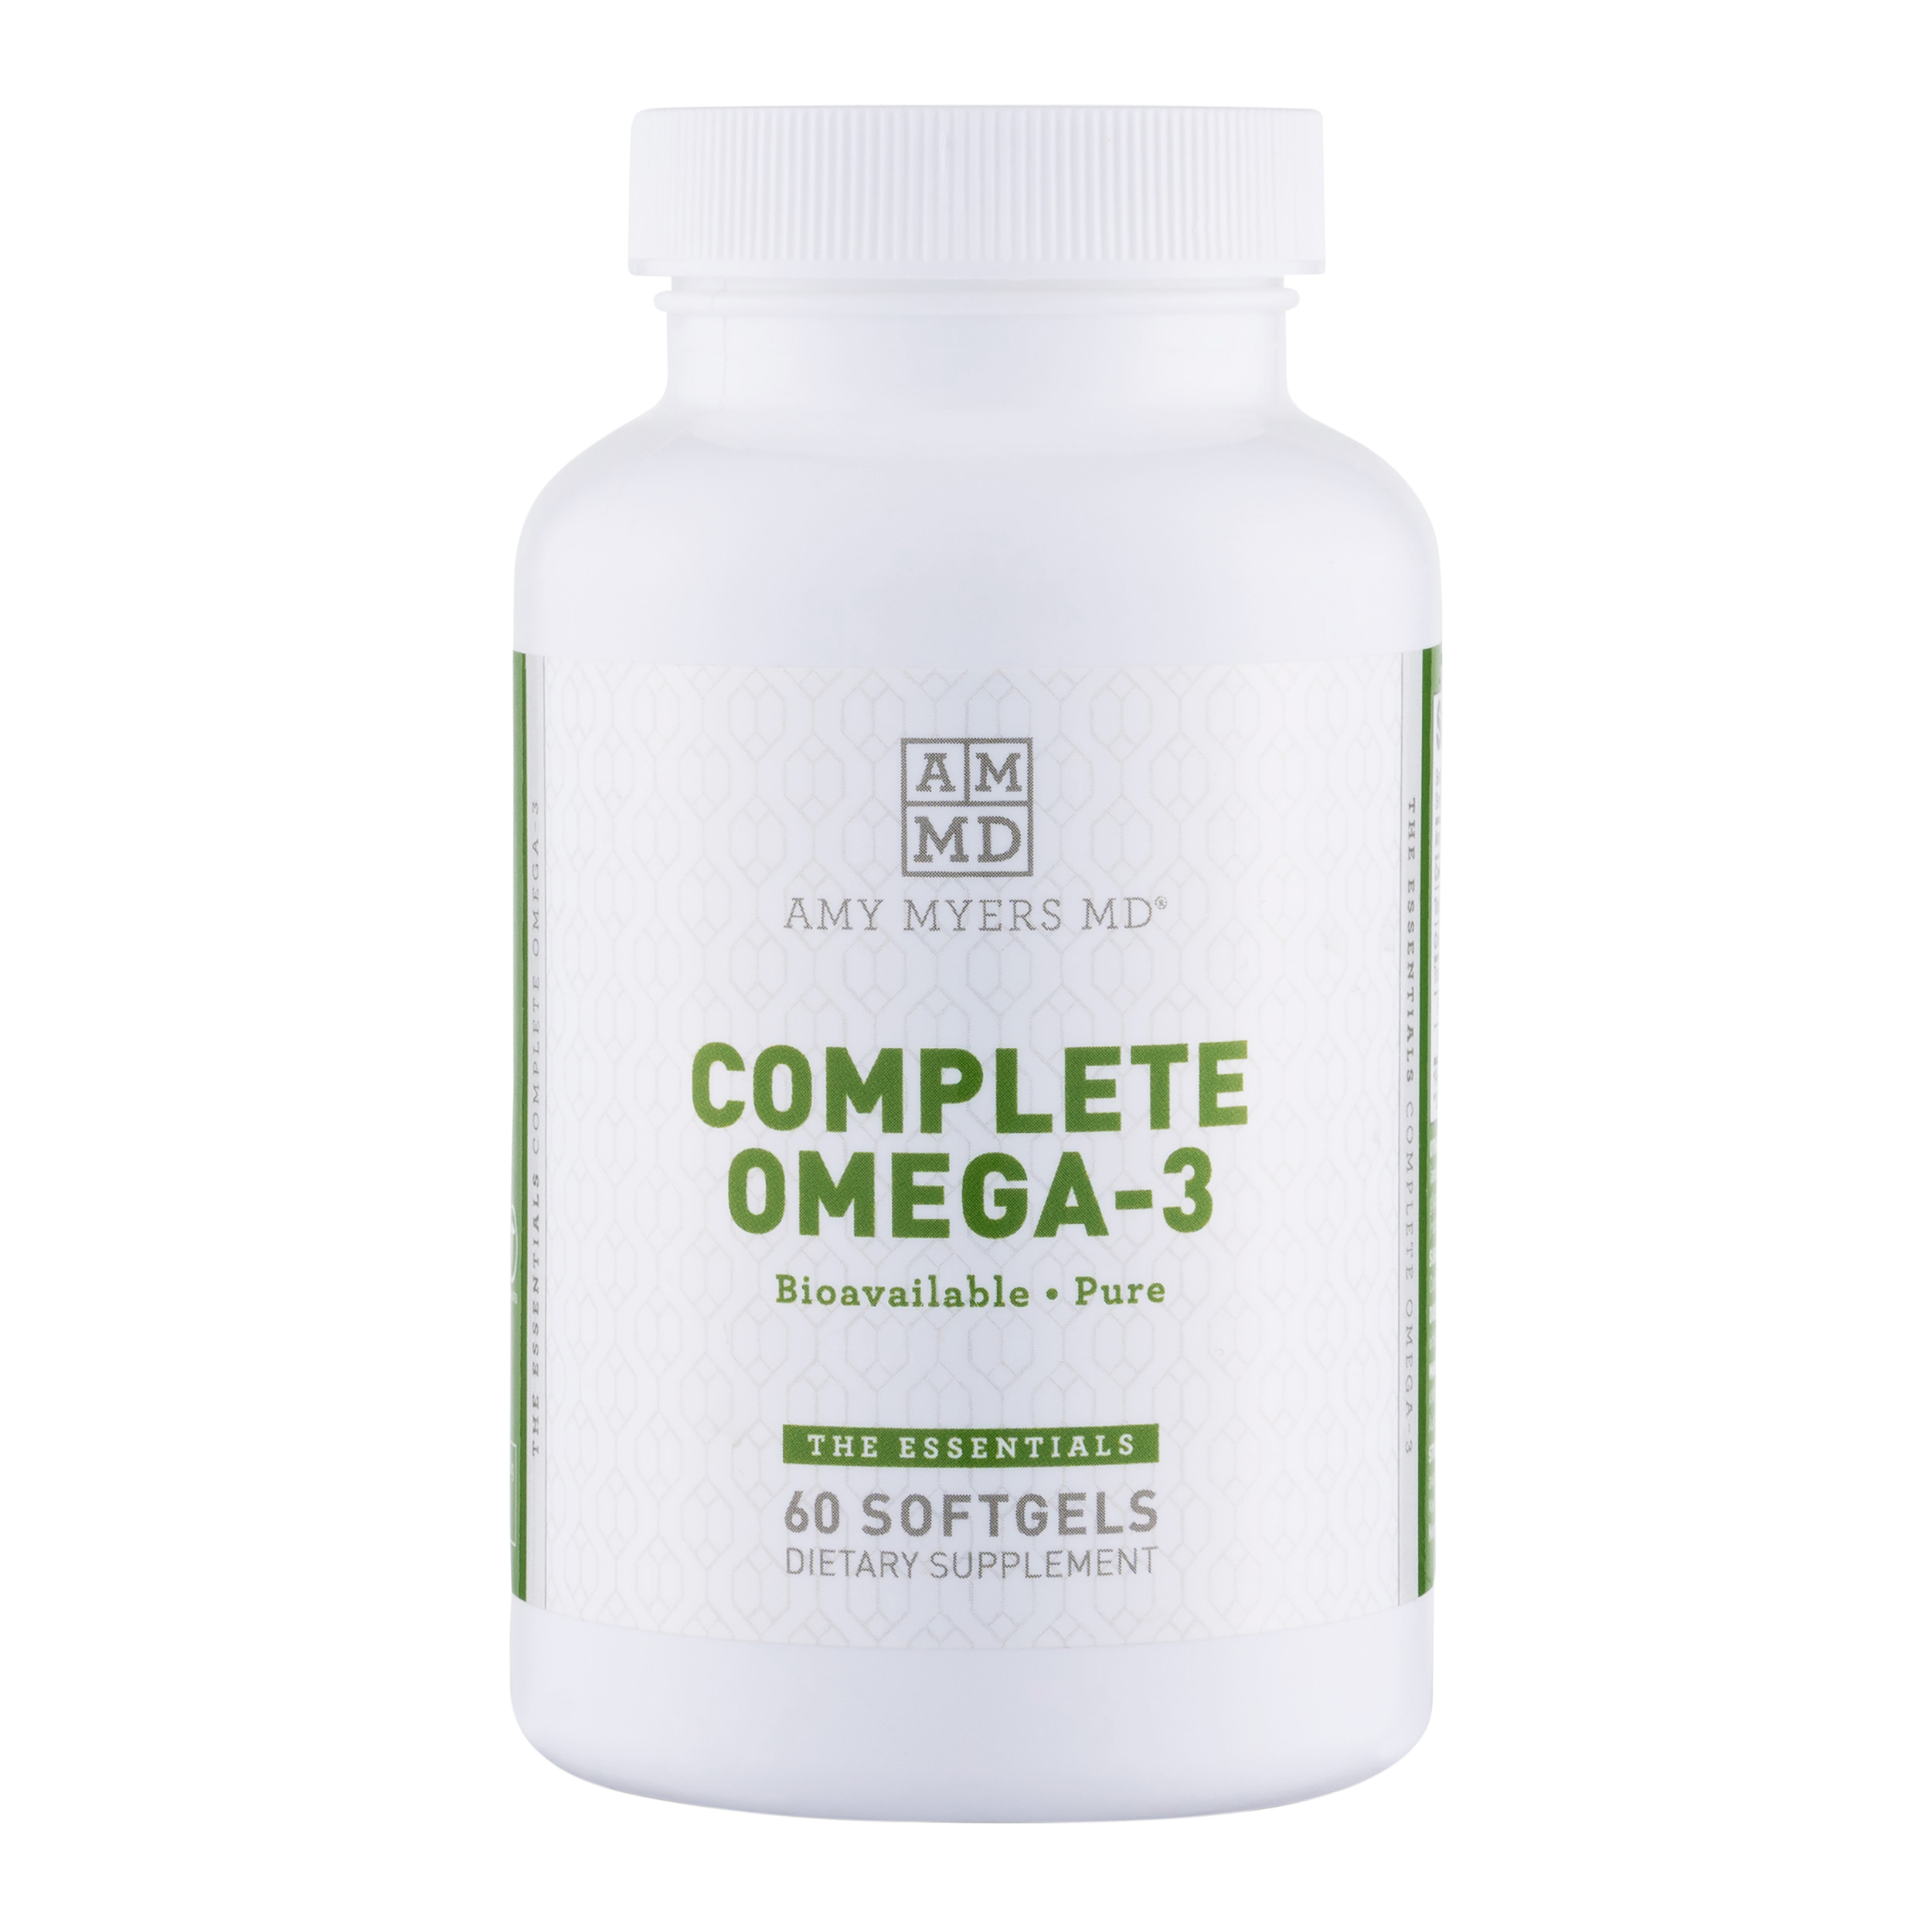 Complete Omega-3 - 60 Softgels | Amy Myers MD